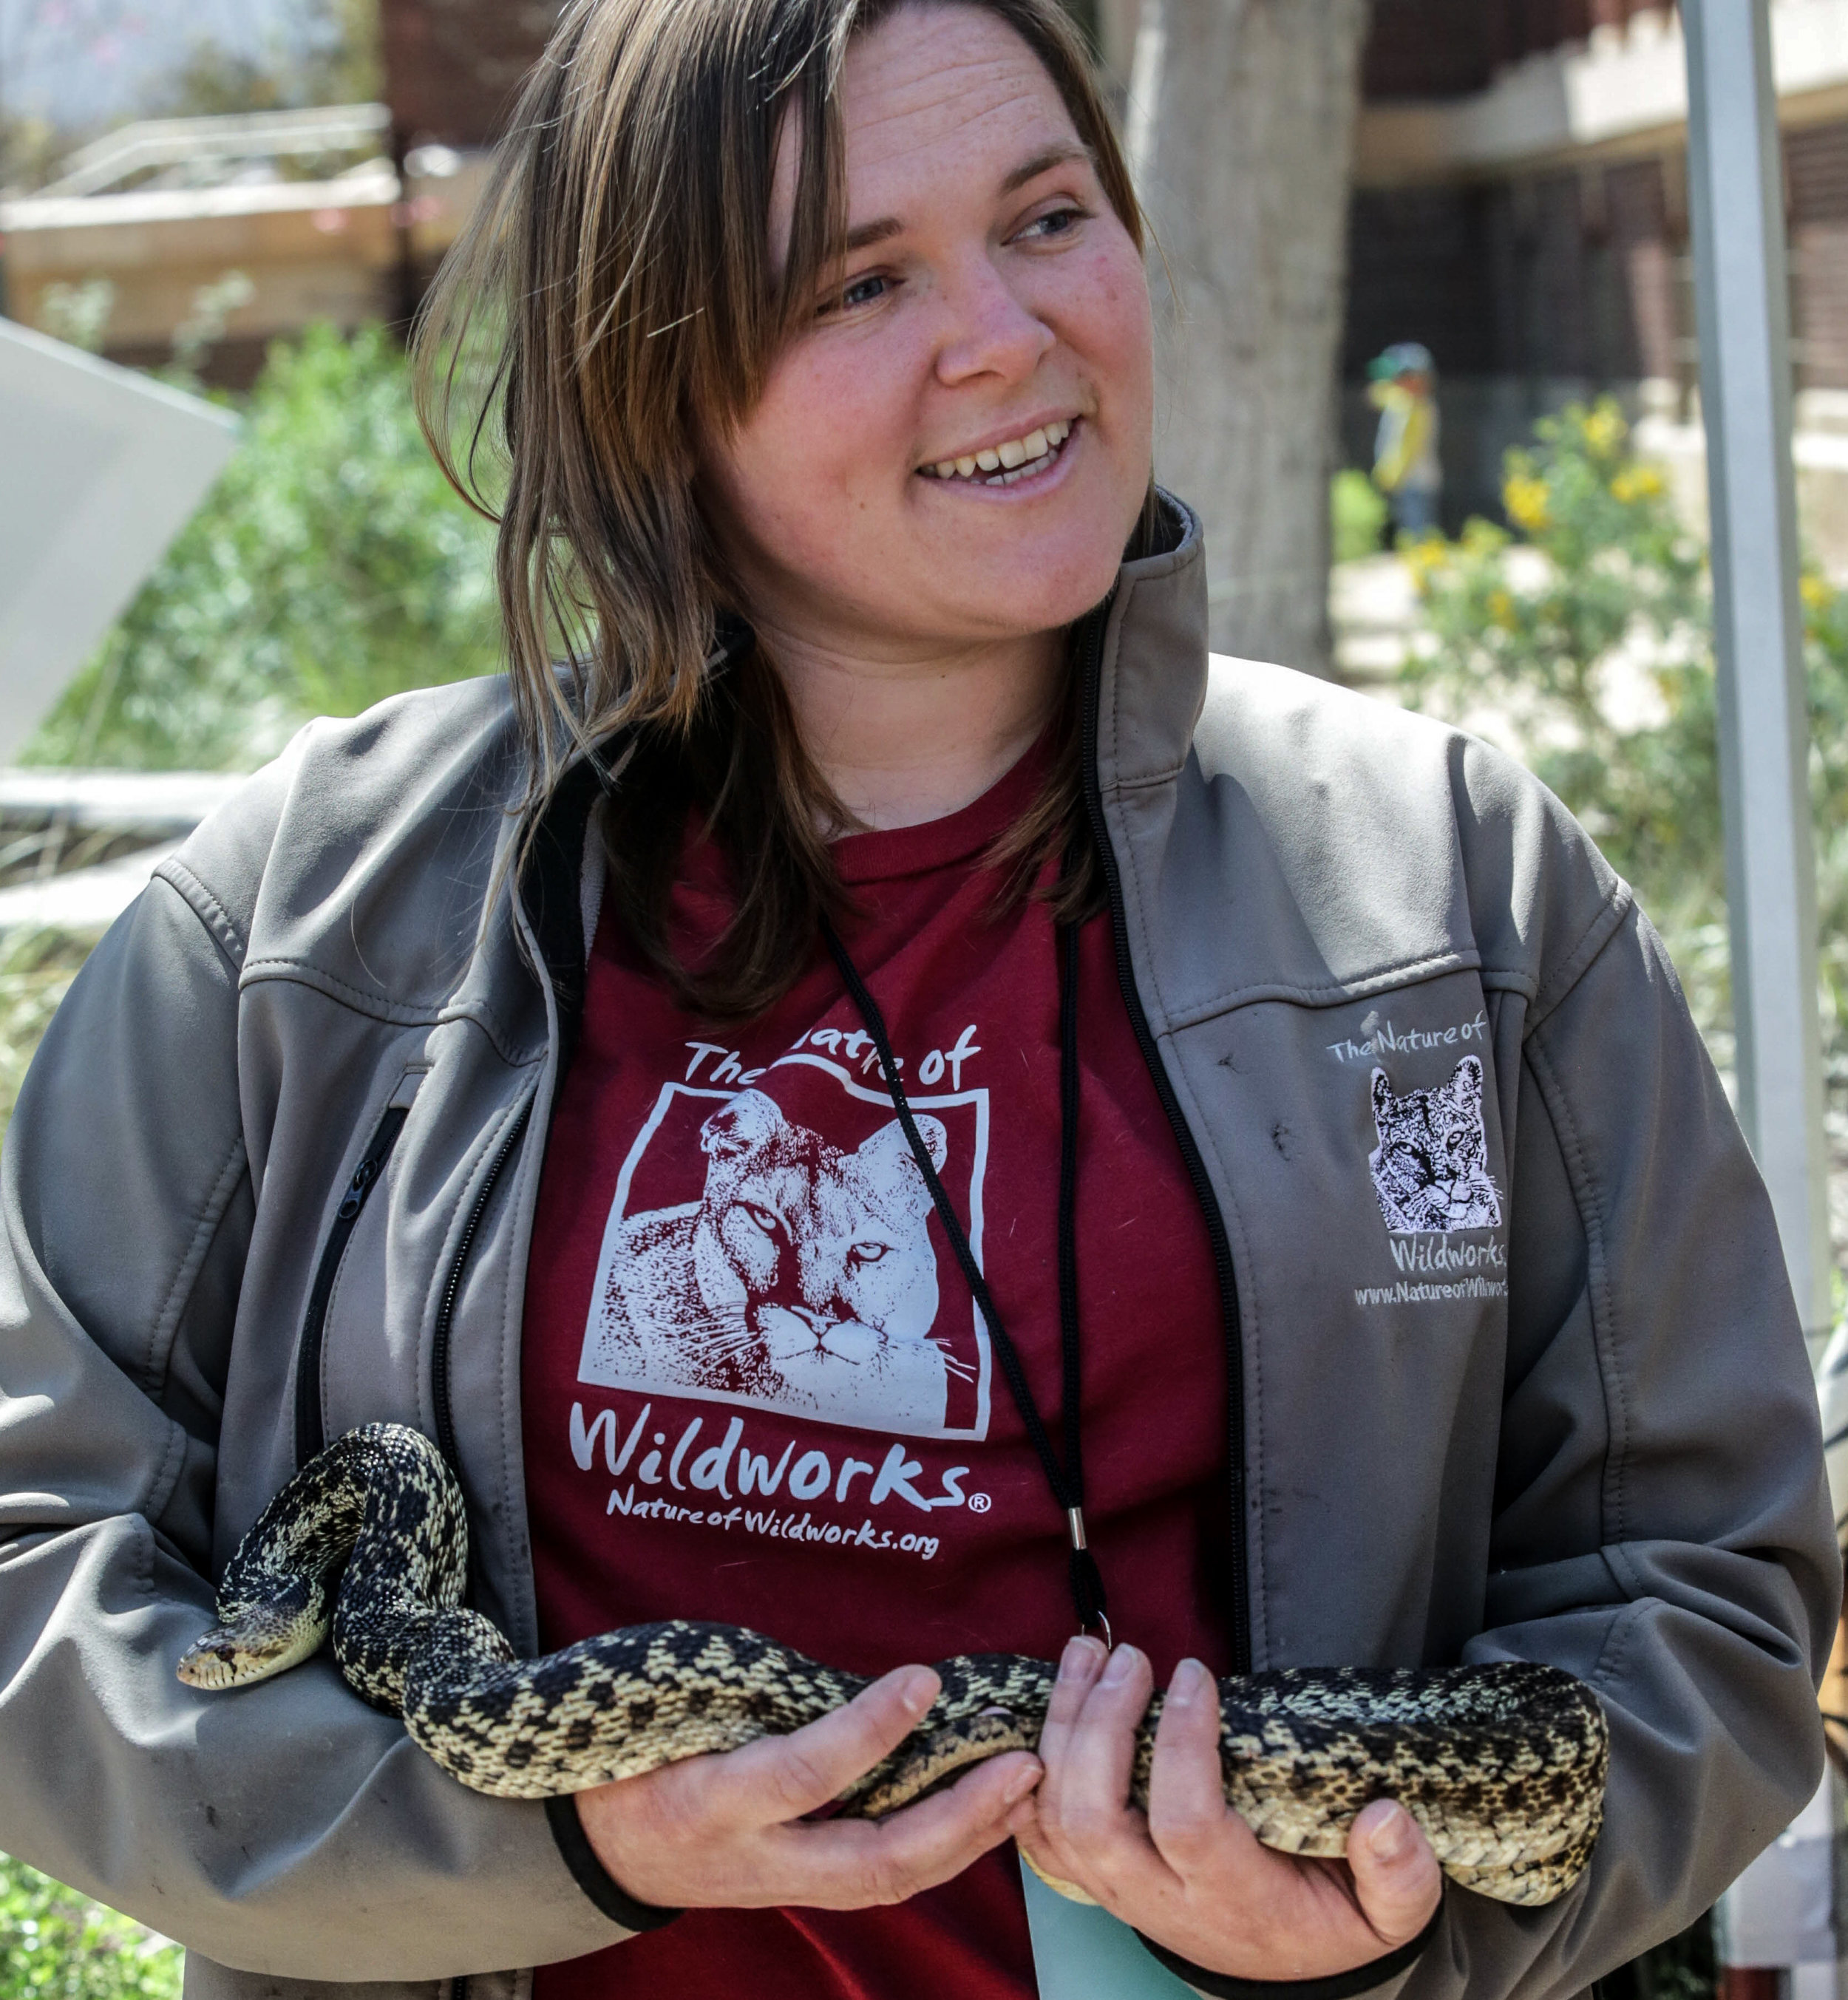  Nicole Wilson craddles a Gopher Snake (Jake), offering children and others guests at the Los Angeles Nature Fest on opportuinity to touch and learn about Jake up close. Wilson was at the Natural History Museum on the University of Southern Californi